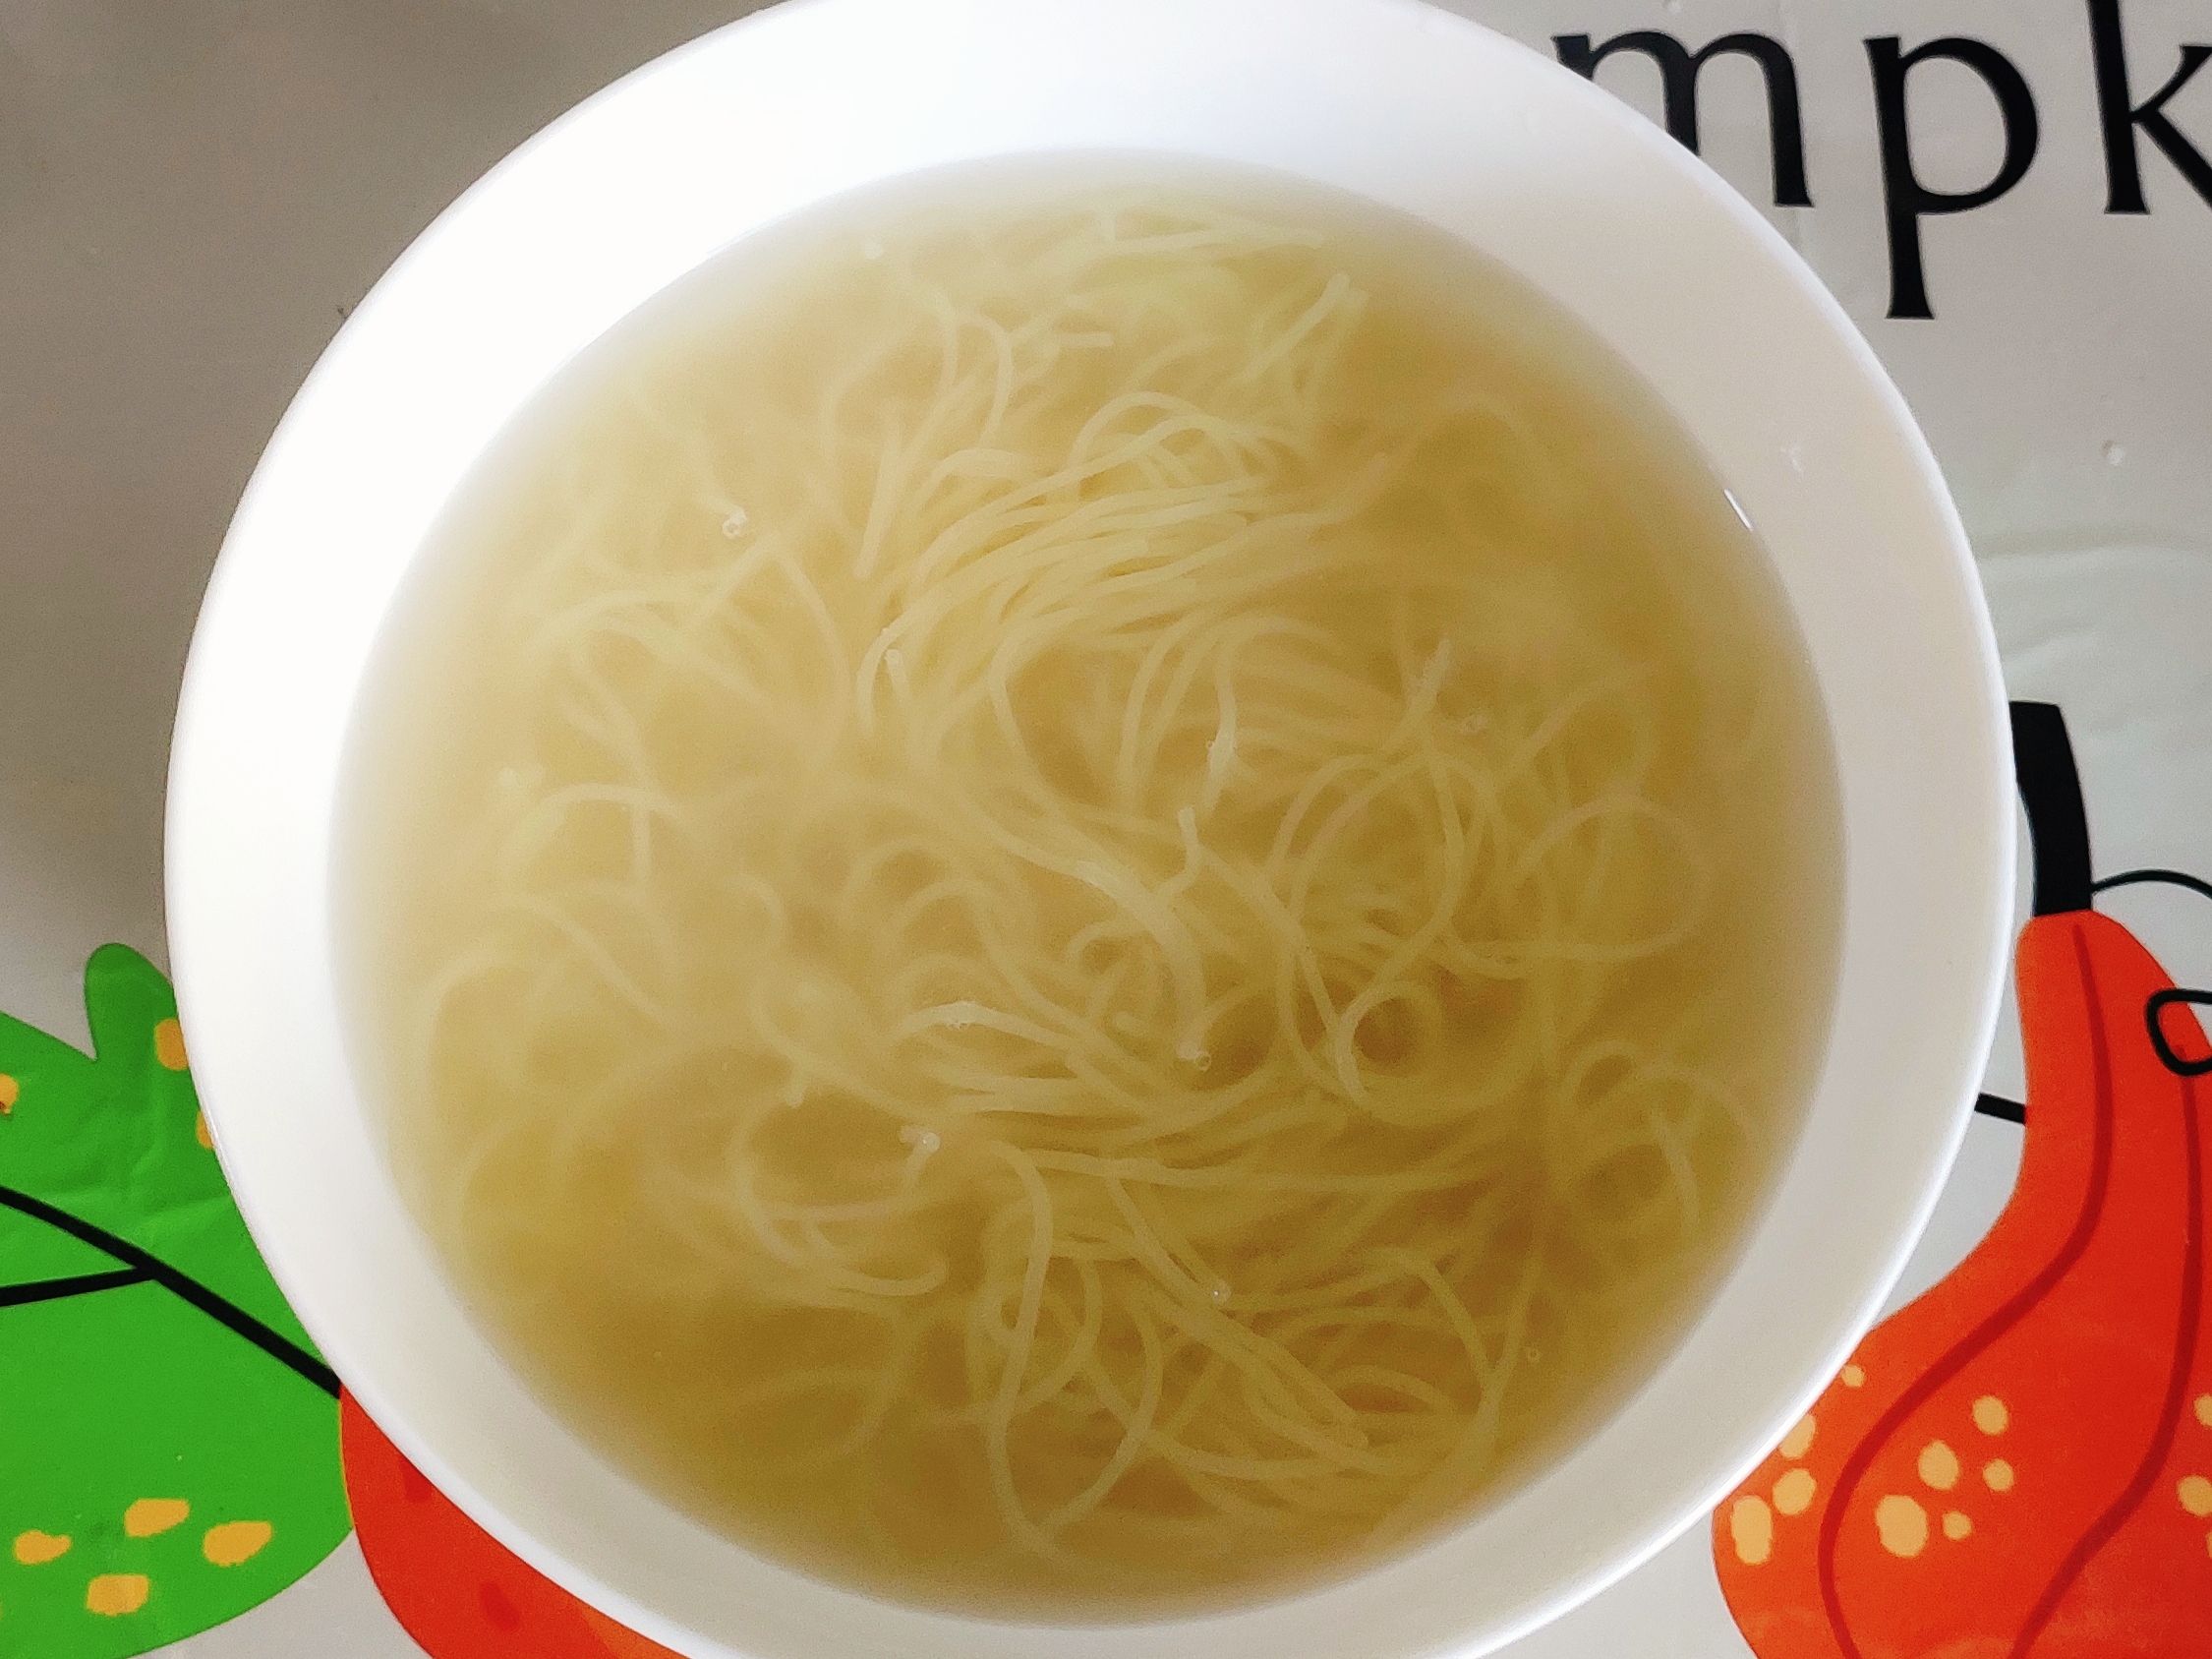 Noodles are Going to be Eaten Like this recipe